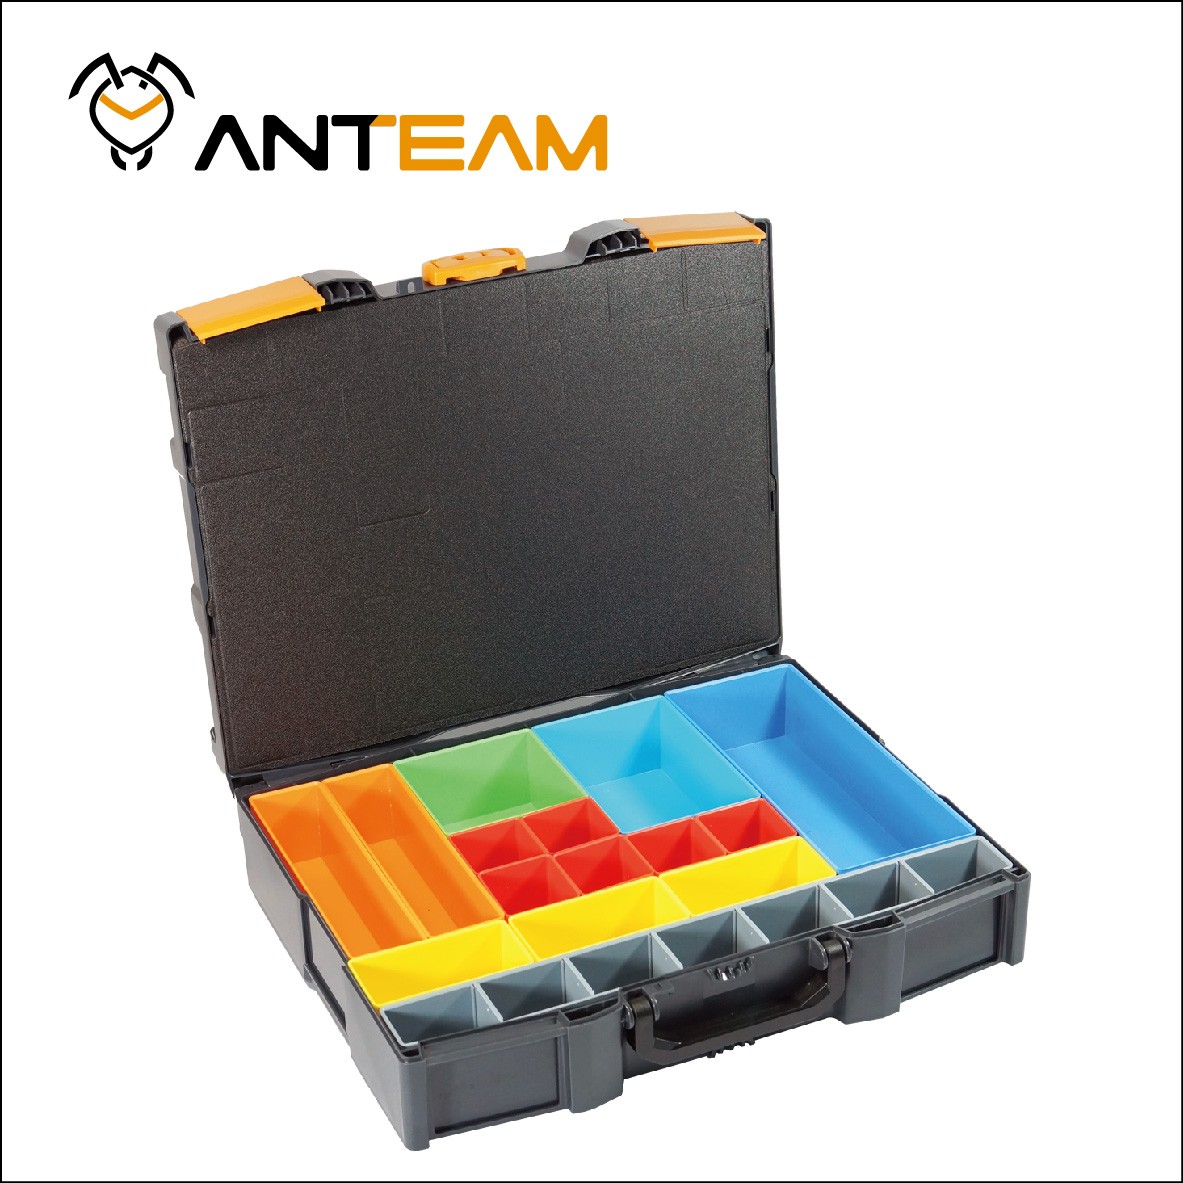 ANTEAM stackable box